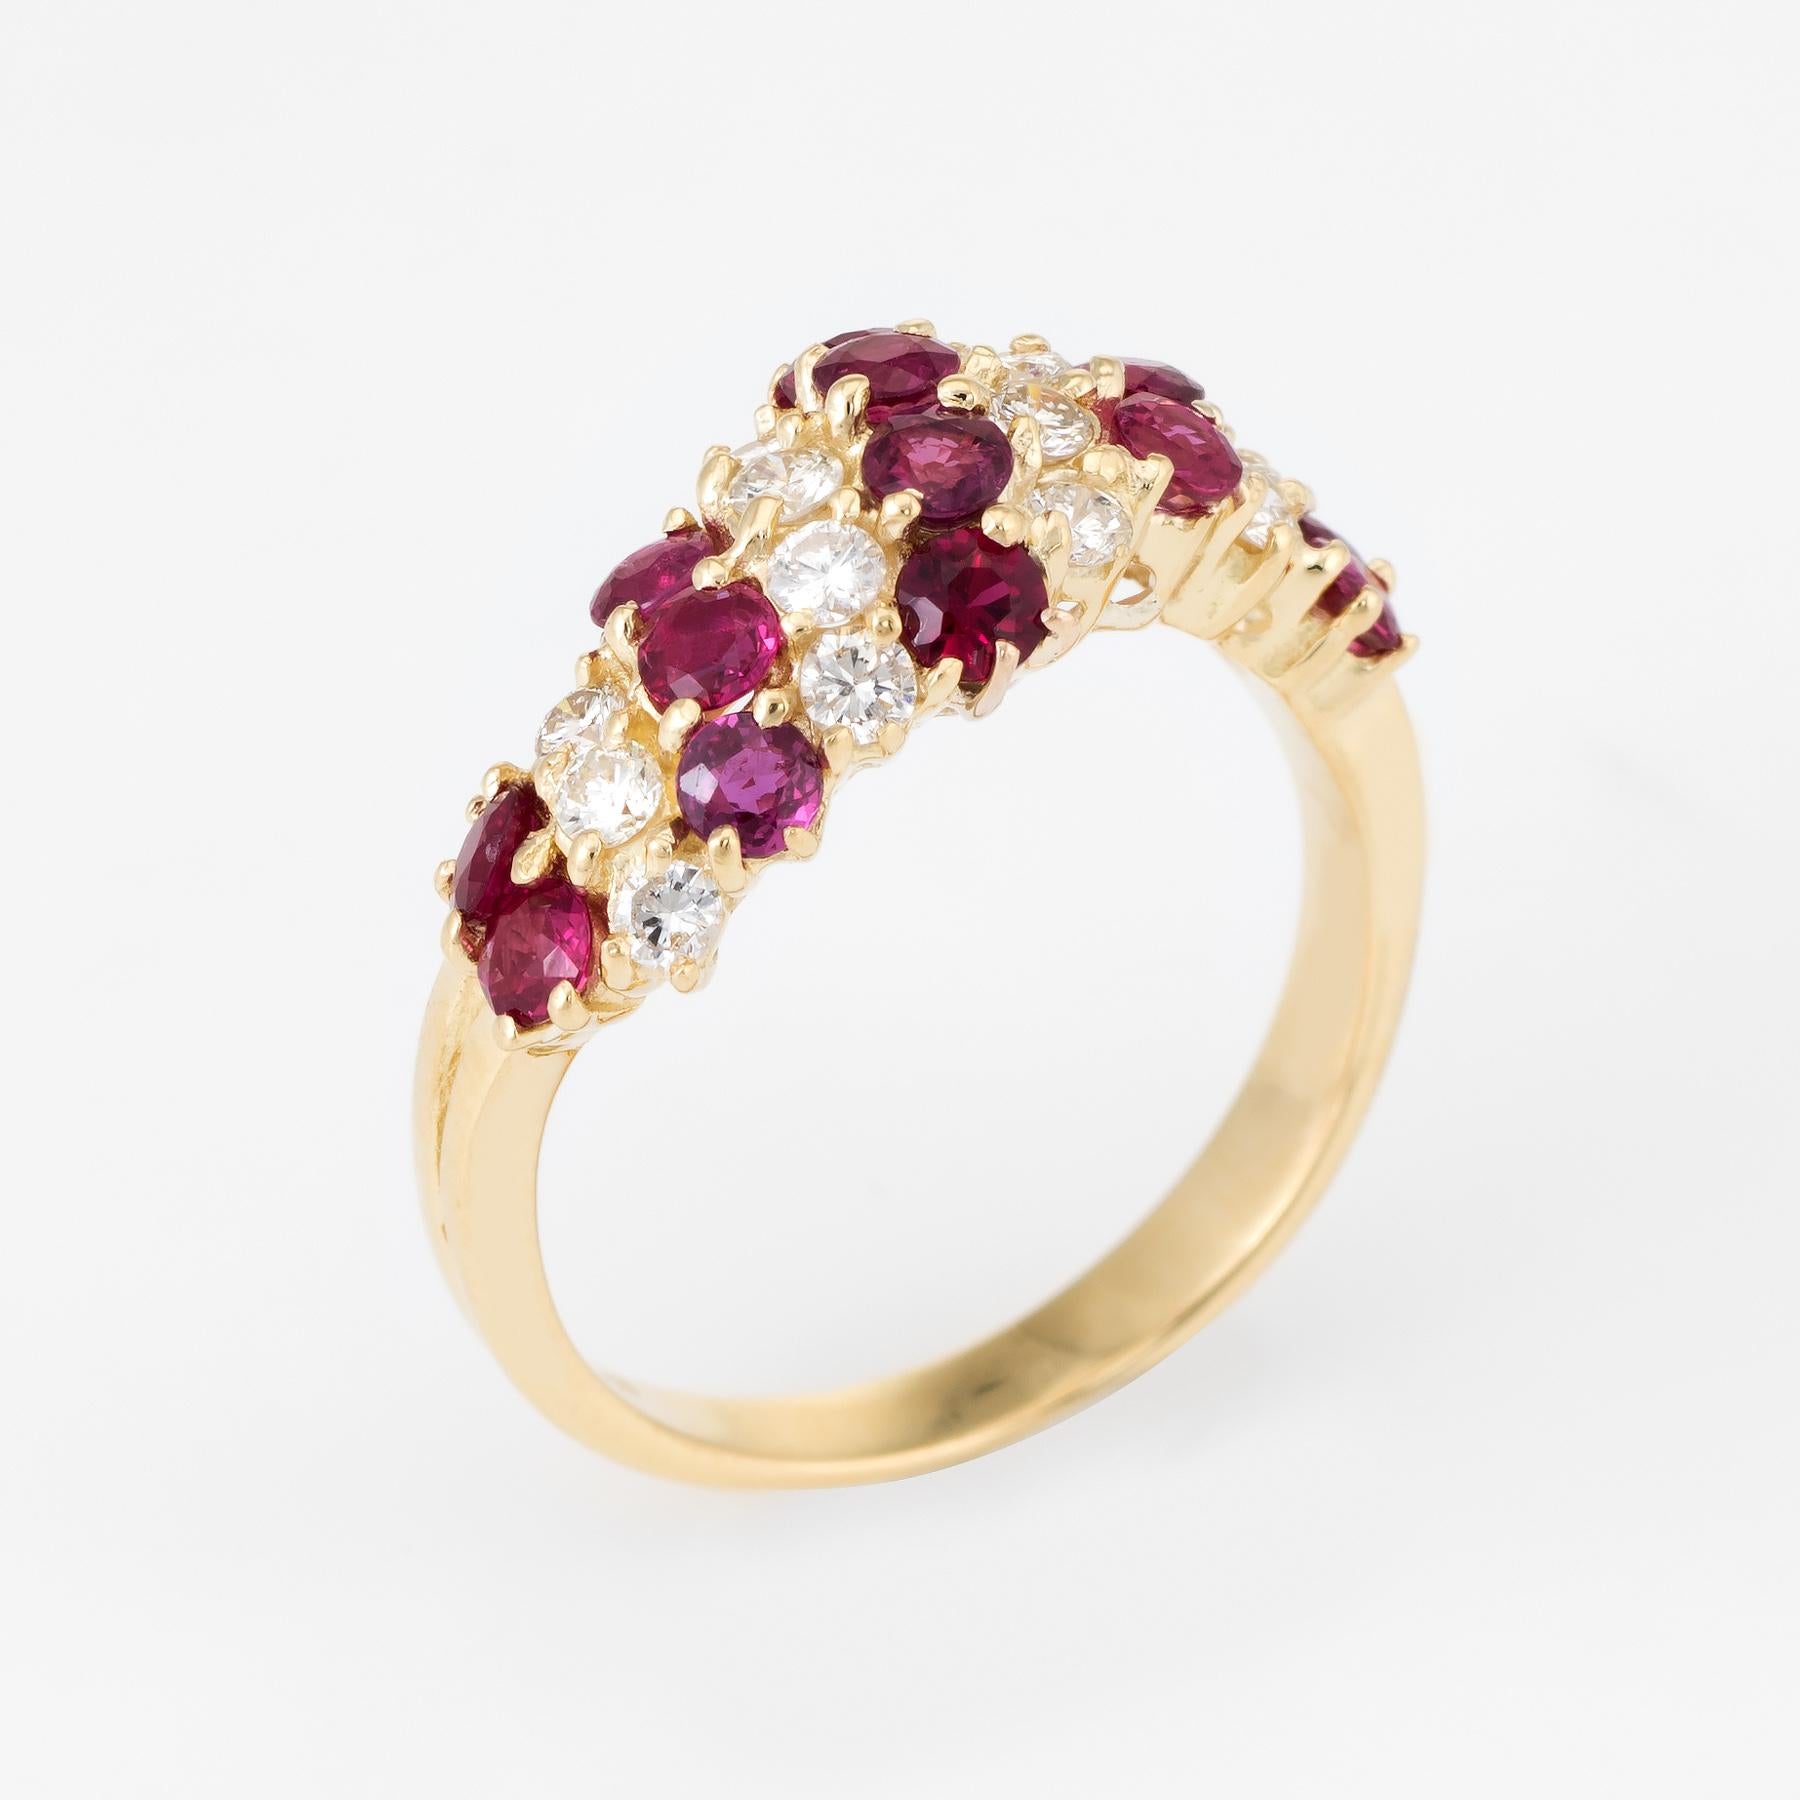 Elegant vintage band, crafted in 18 karat yellow gold. 

14 round brilliant cut diamonds are estimated at 0.03 carats each and total an estimated 0.42 carats (estimated at G-H color and VS clarity), accented with 14 estimated 0.06 carat rubies (0.84